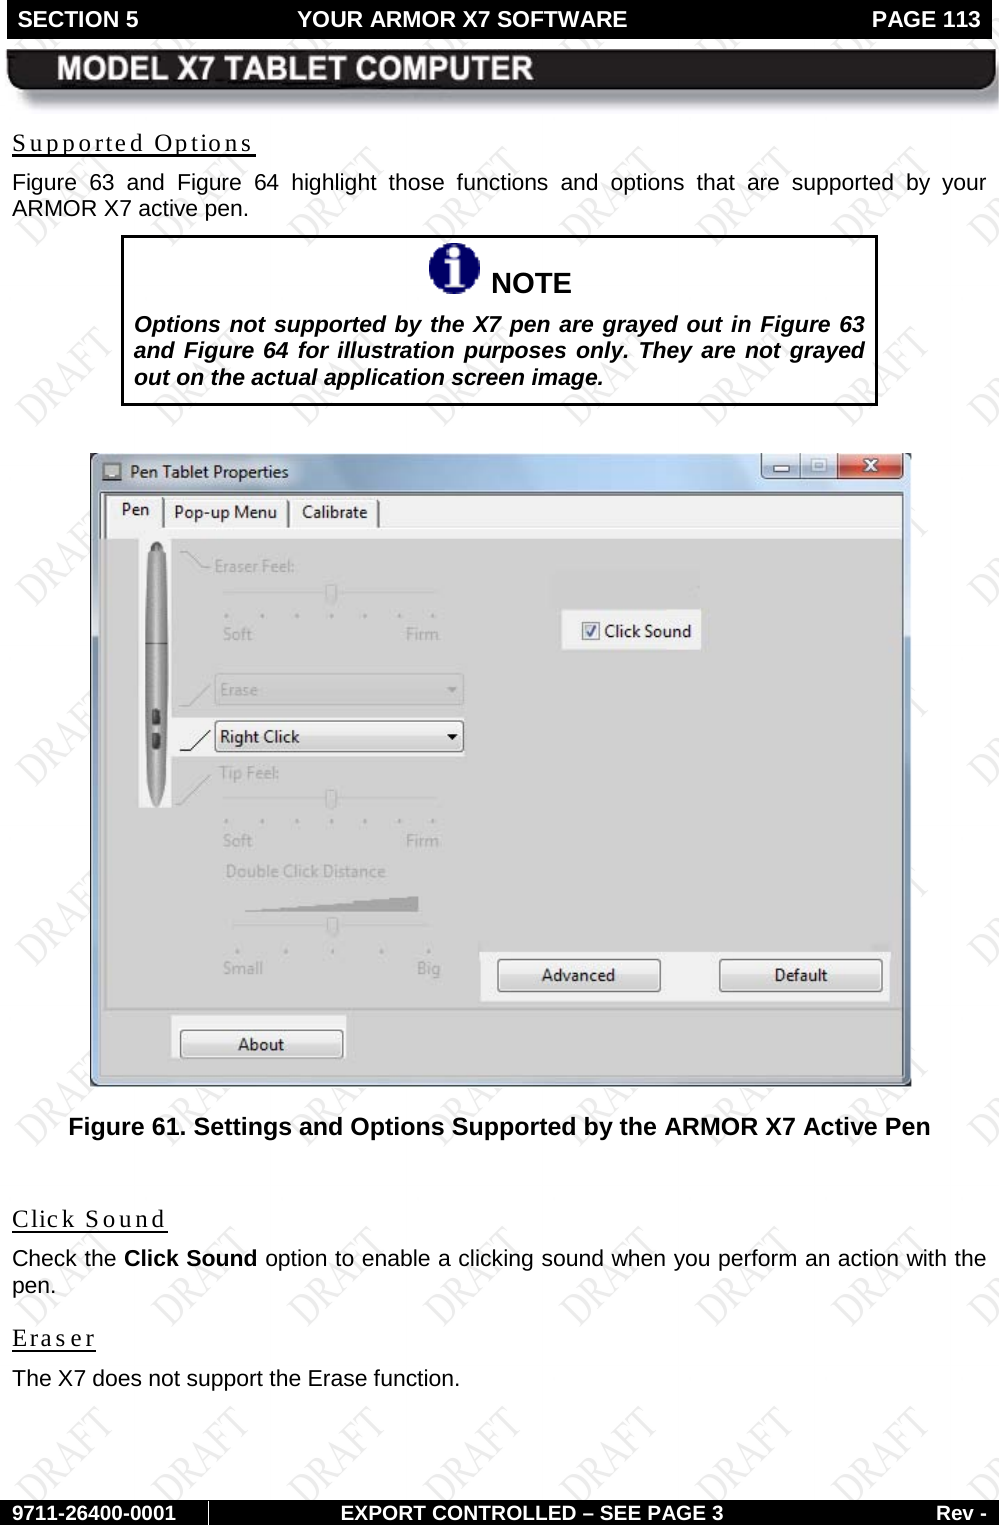 SECTION 5 YOUR ARMOR X7 SOFTWARE  PAGE 113        9711-26400-0001 EXPORT CONTROLLED – SEE PAGE 3 Rev - Supported Options Figure  63 and  Figure  64 highlight those functions and options that are supported by your ARMOR X7 active pen.   NOTE Options not supported by the X7 pen are grayed out in Figure 63 and Figure 64 for illustration purposes only. They are not grayed out on the actual application screen image.   Figure 61. Settings and Options Supported by the ARMOR X7 Active Pen  Click Sound  Check the Click Sound option to enable a clicking sound when you perform an action with the pen. Eraser The X7 does not support the Erase function.   